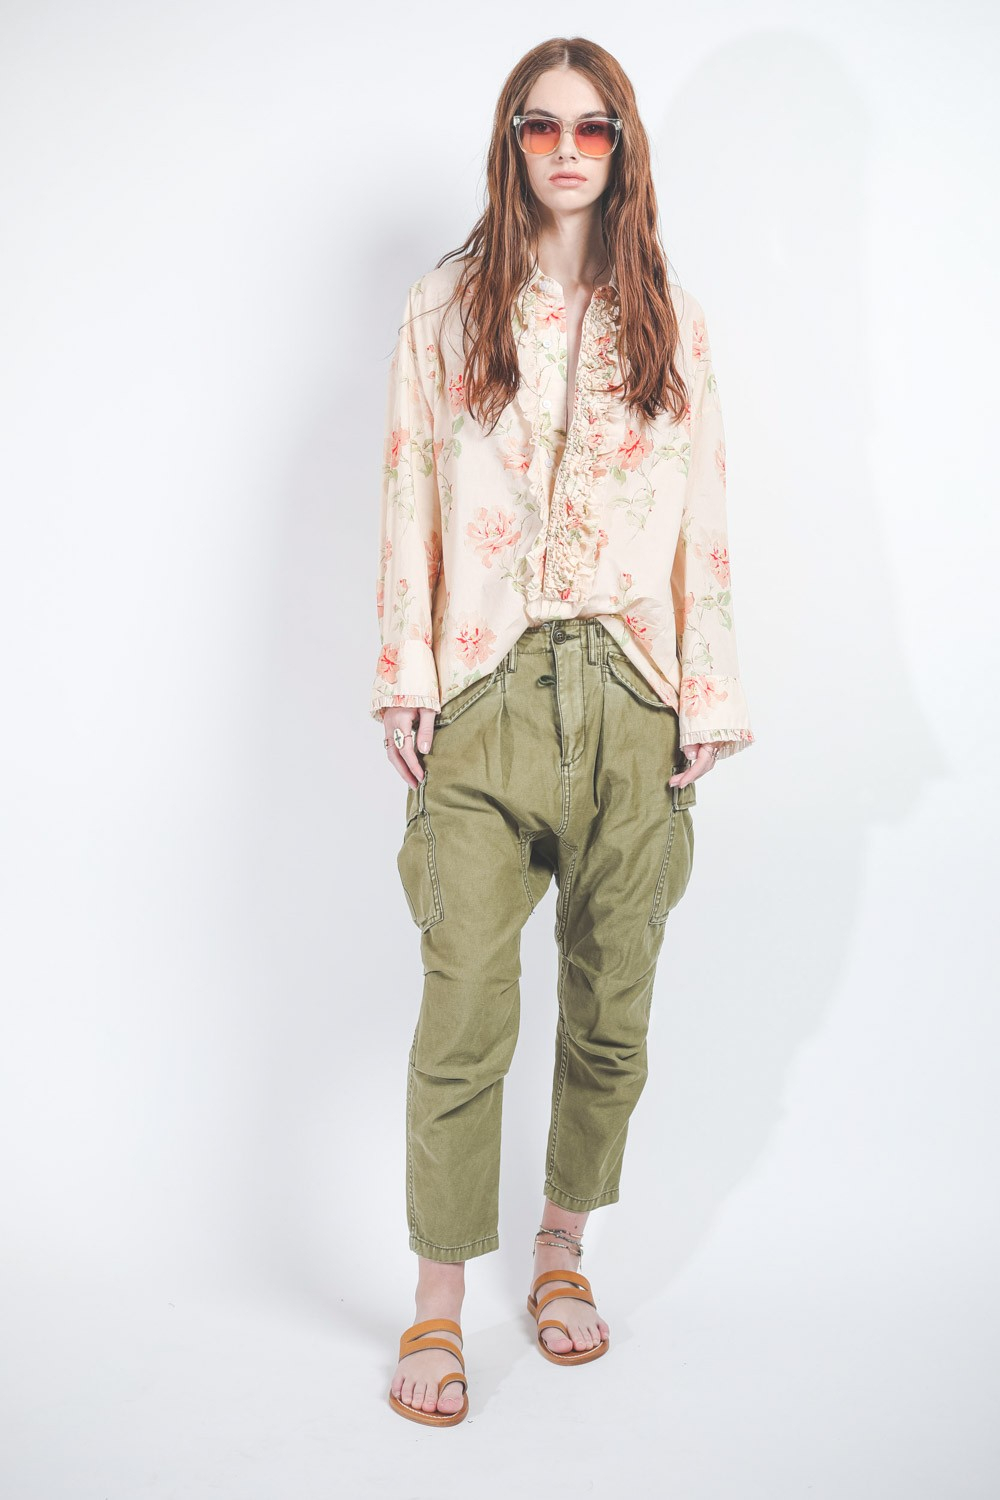 Trousers R13 Denim Collection Harem Cargo Pant - Olive